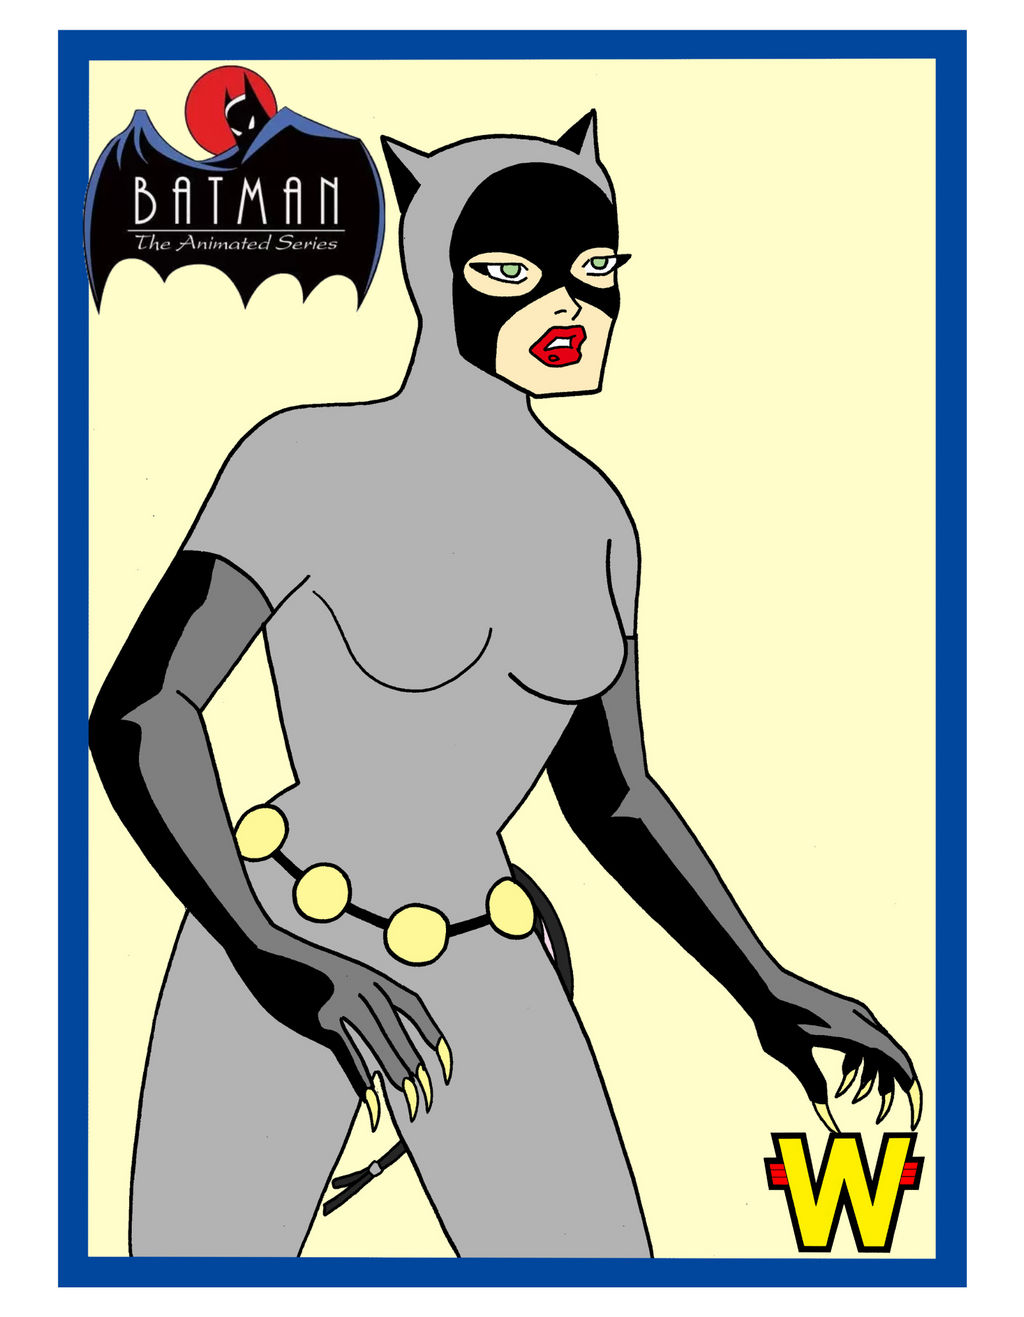 1992 Cat Woman from Batman Animated Series by donandron on DeviantArt